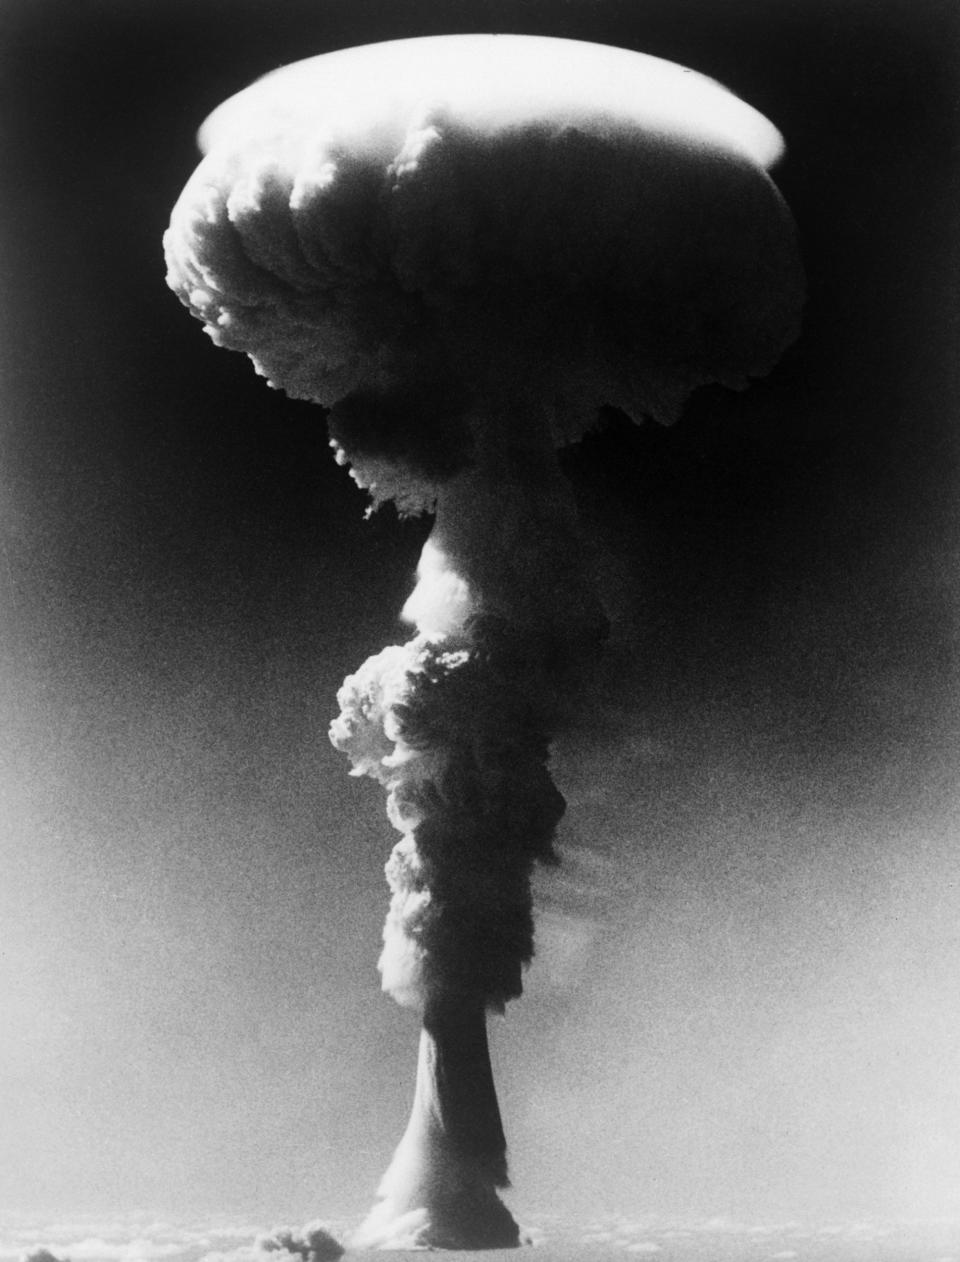 The mushroom cloud generated during Britain's first tests of Operation Grapple, as seen from an aircraft flying above the local natural cloud on May 15 1957; Bass was present at Grapple Y the following year